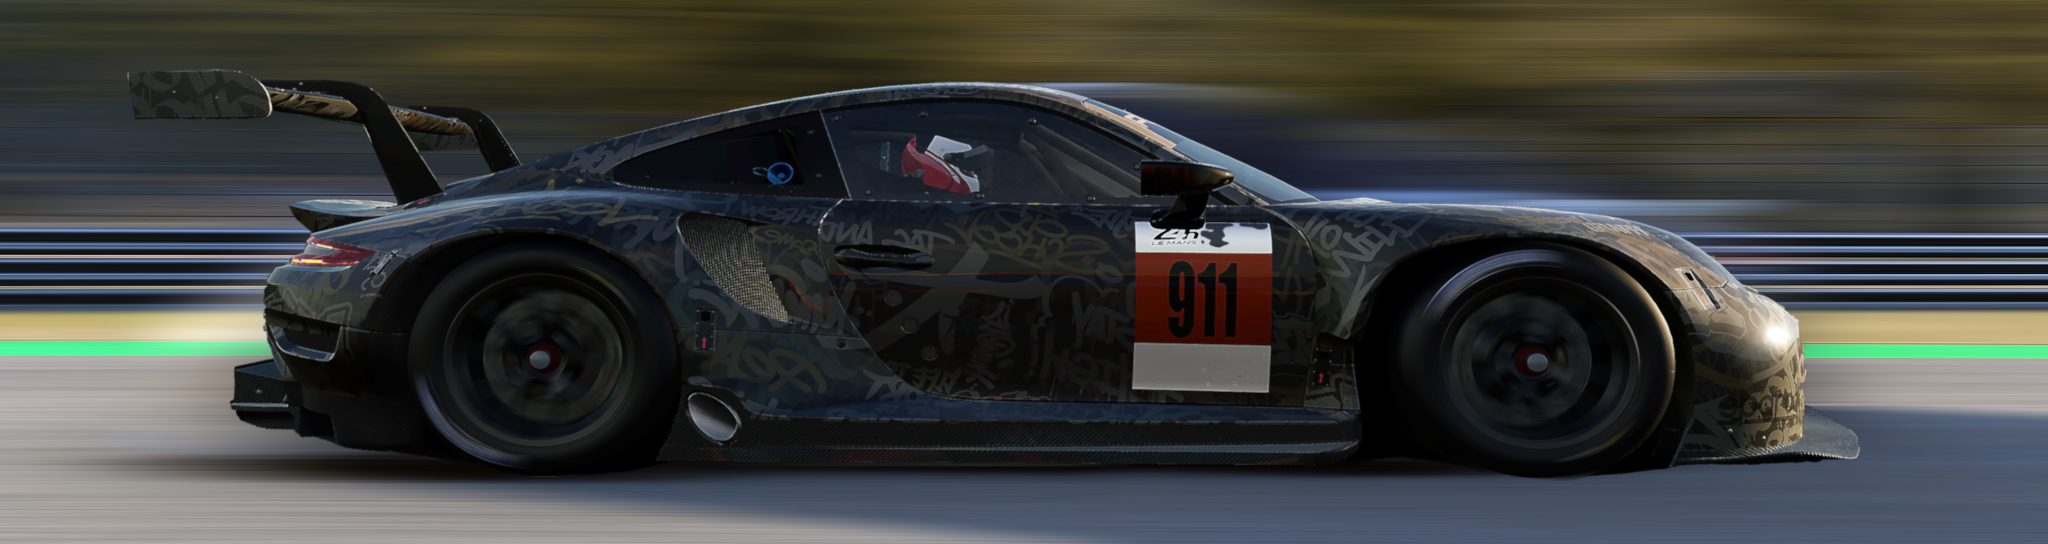 911 gte screen saver 2.png